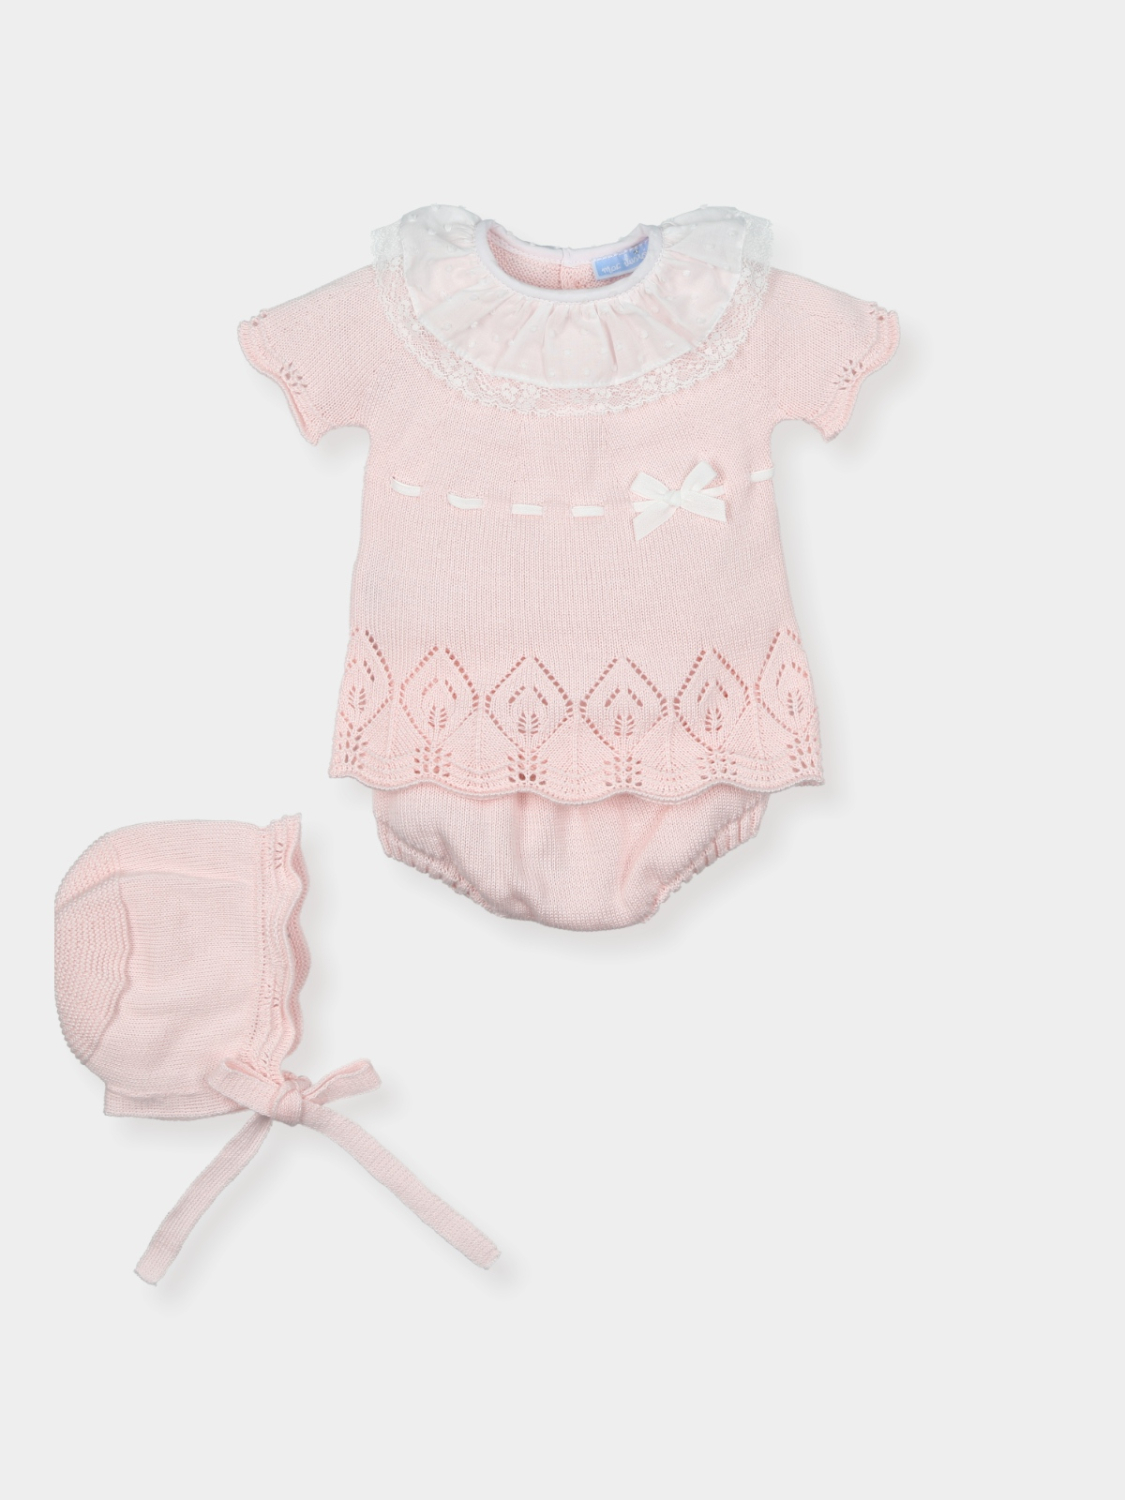 Baby pink lace summer outfit